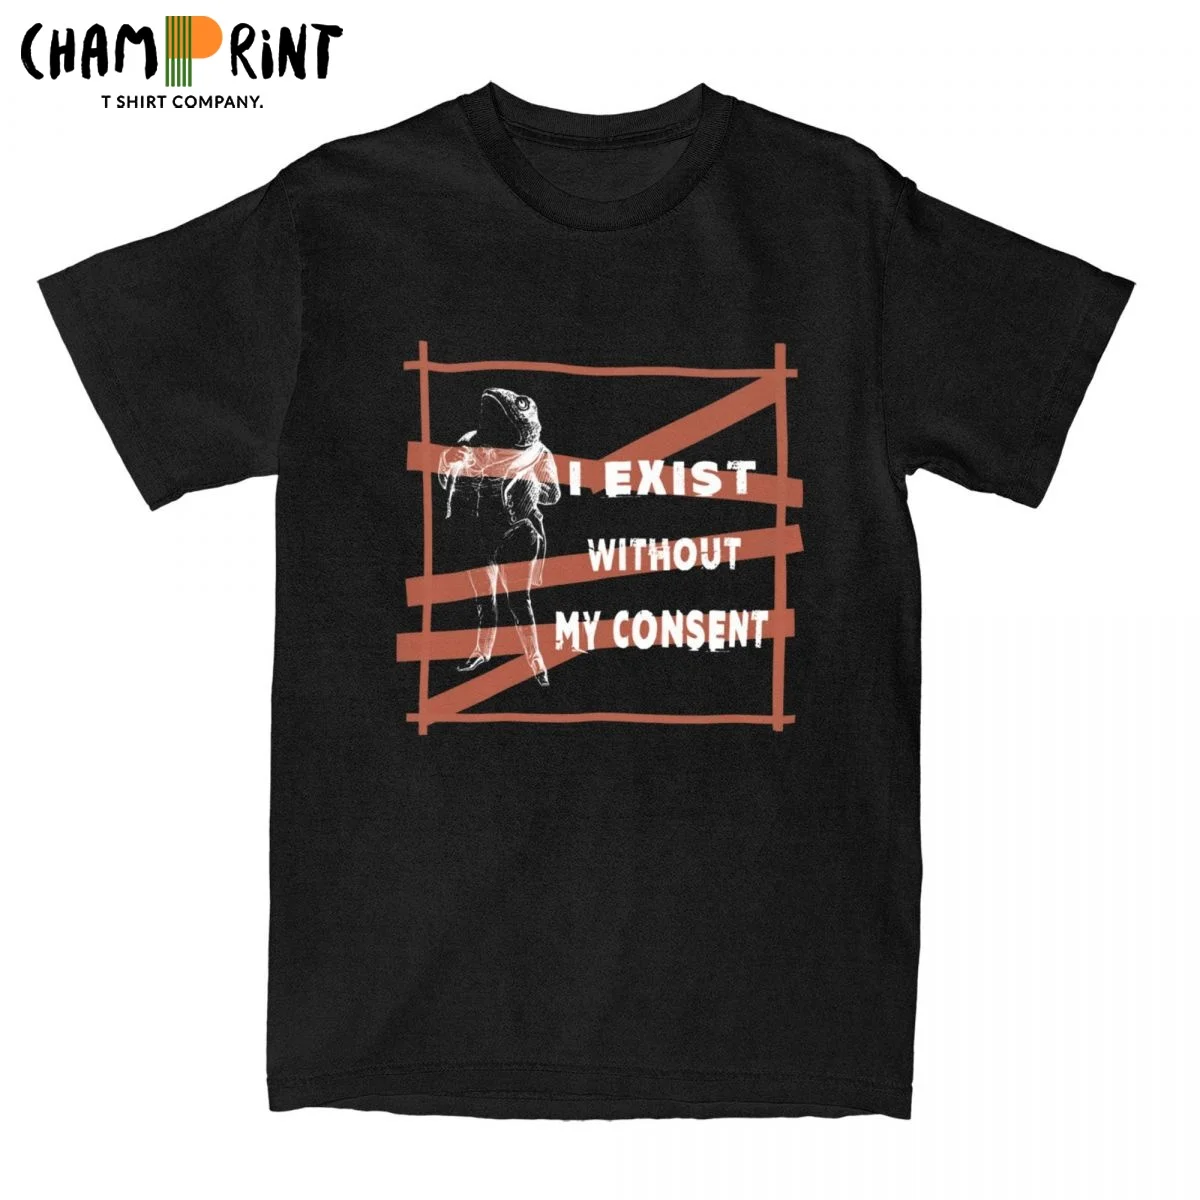 I Exist Without My Consent Men's T Shirts Vintage Tee Shirt Short Sleeve O Neck T-Shirt Cotton Plus Size Tops